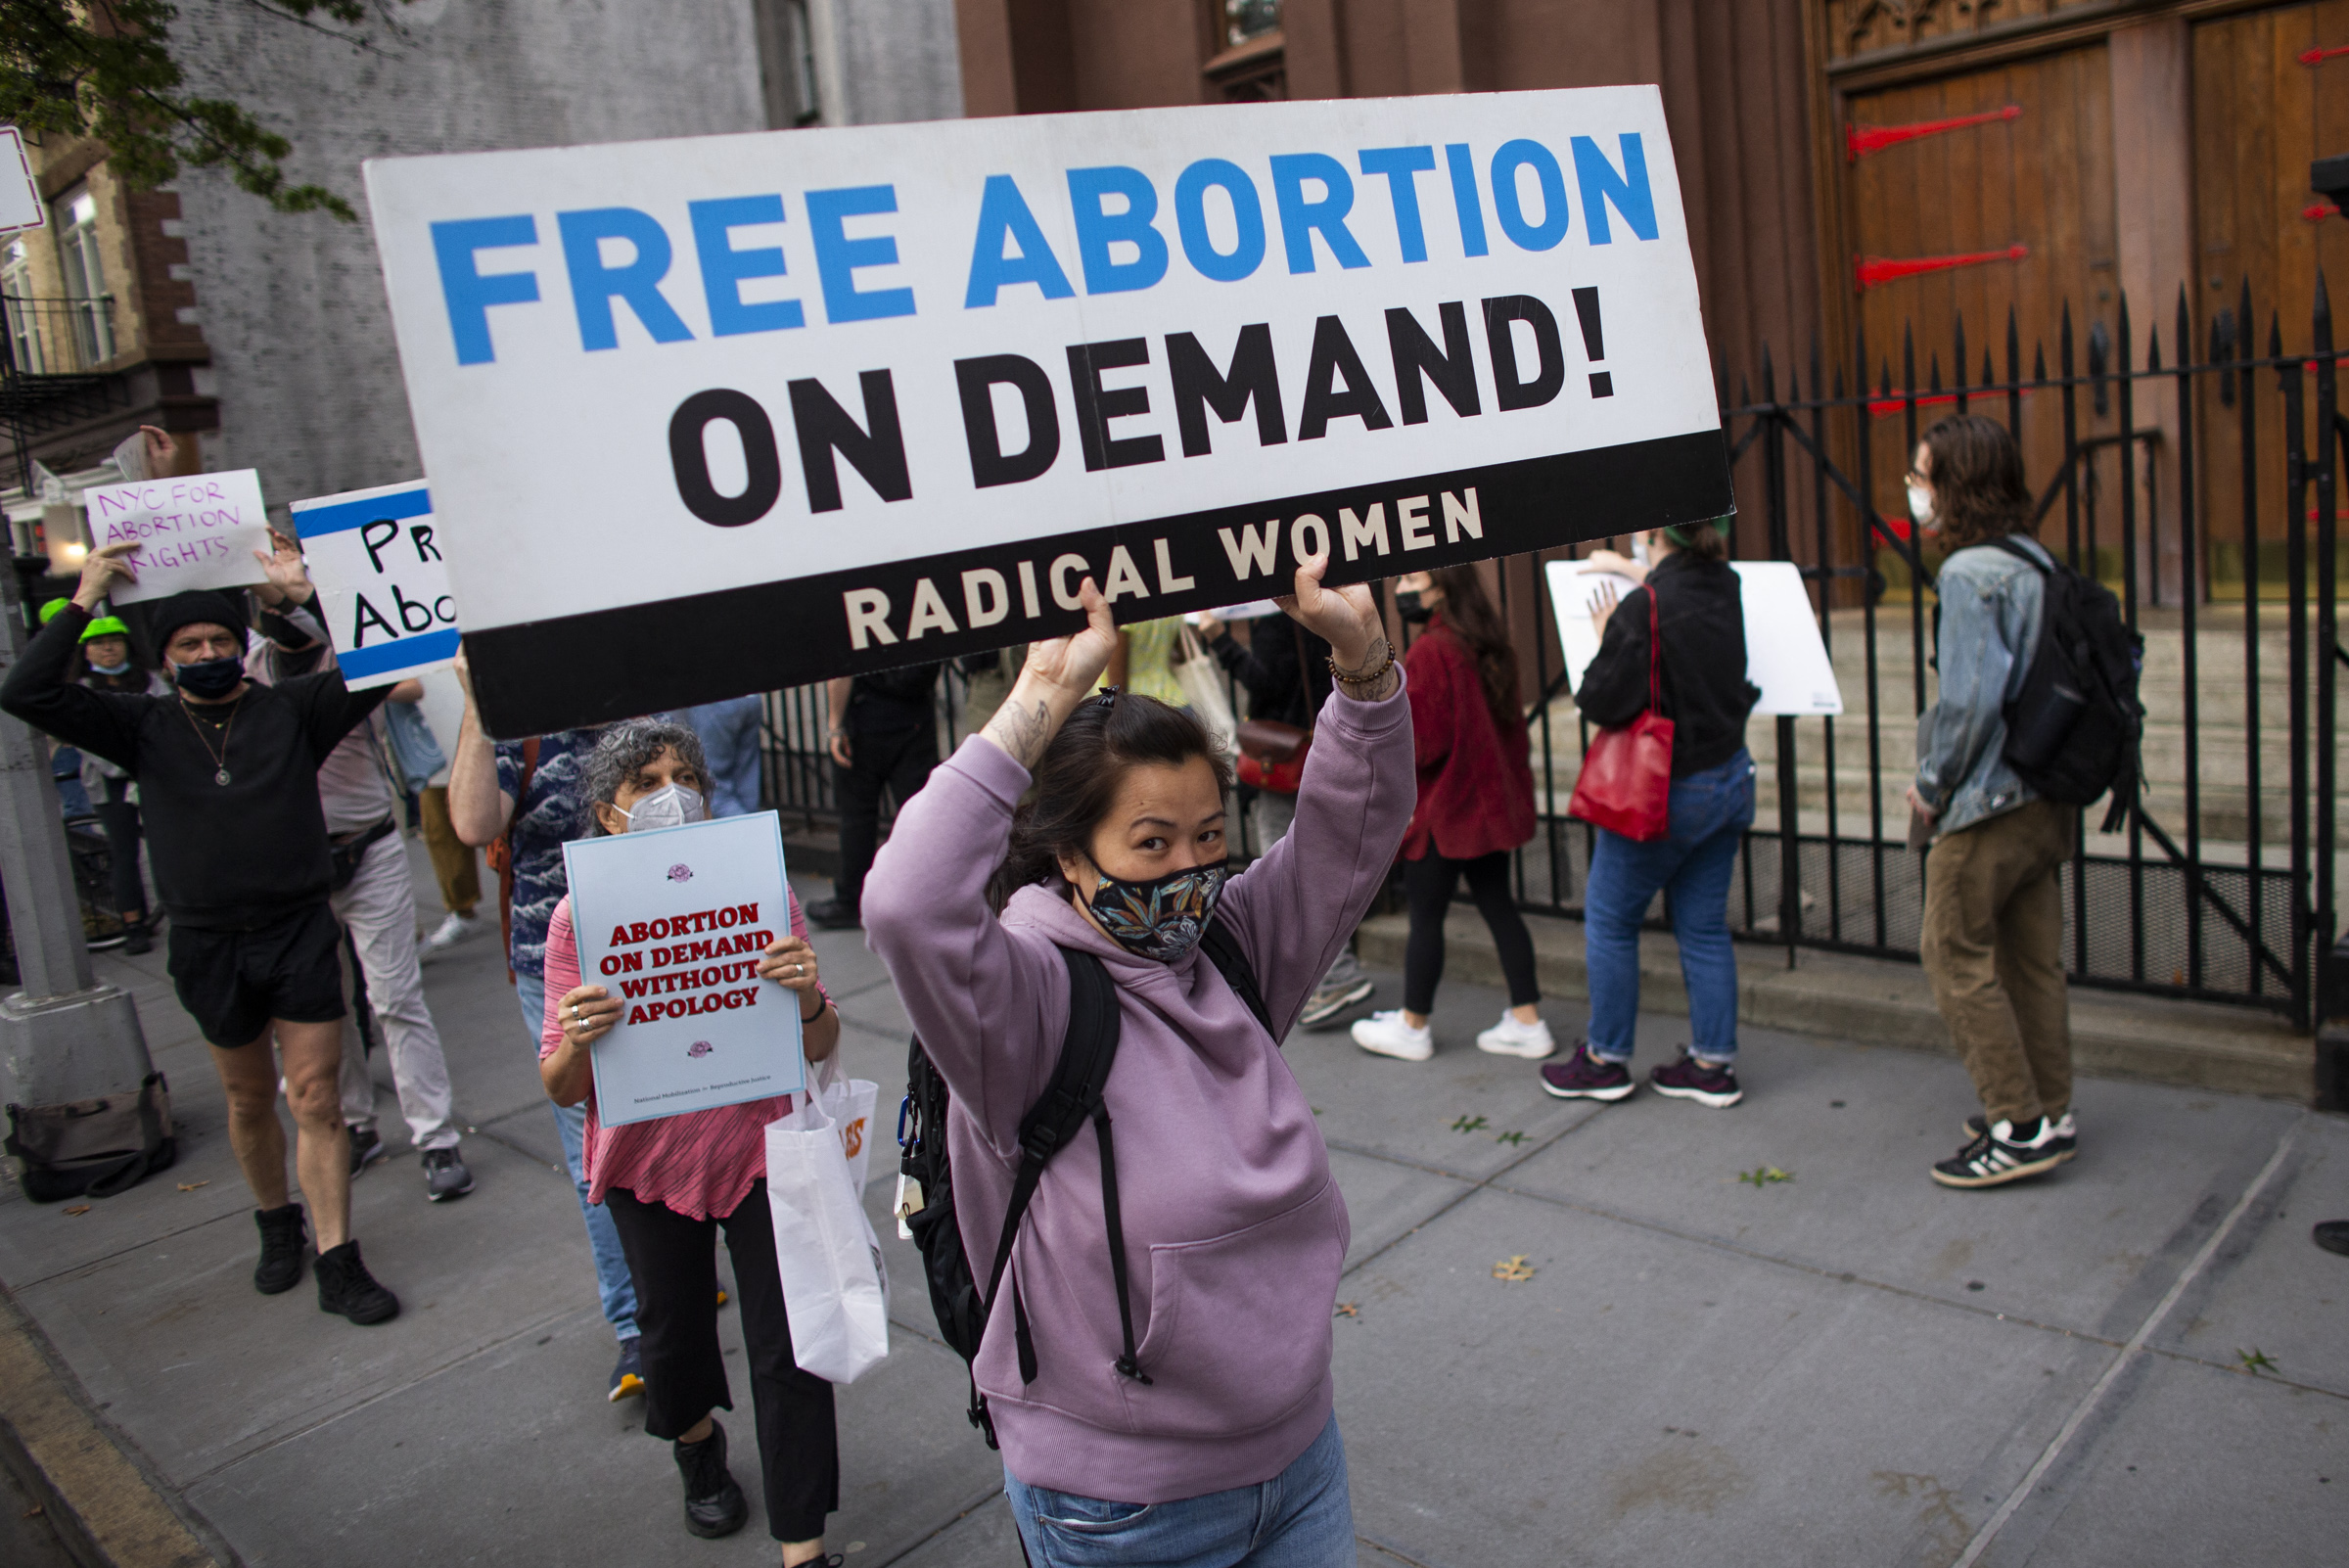 PHOTO: Protesters organized by NYC for abortion rights demonstrate outside Saint Pauls Roman Catholic Church in the Brooklyn Borough of New York City, on Oct. 9, 2021.